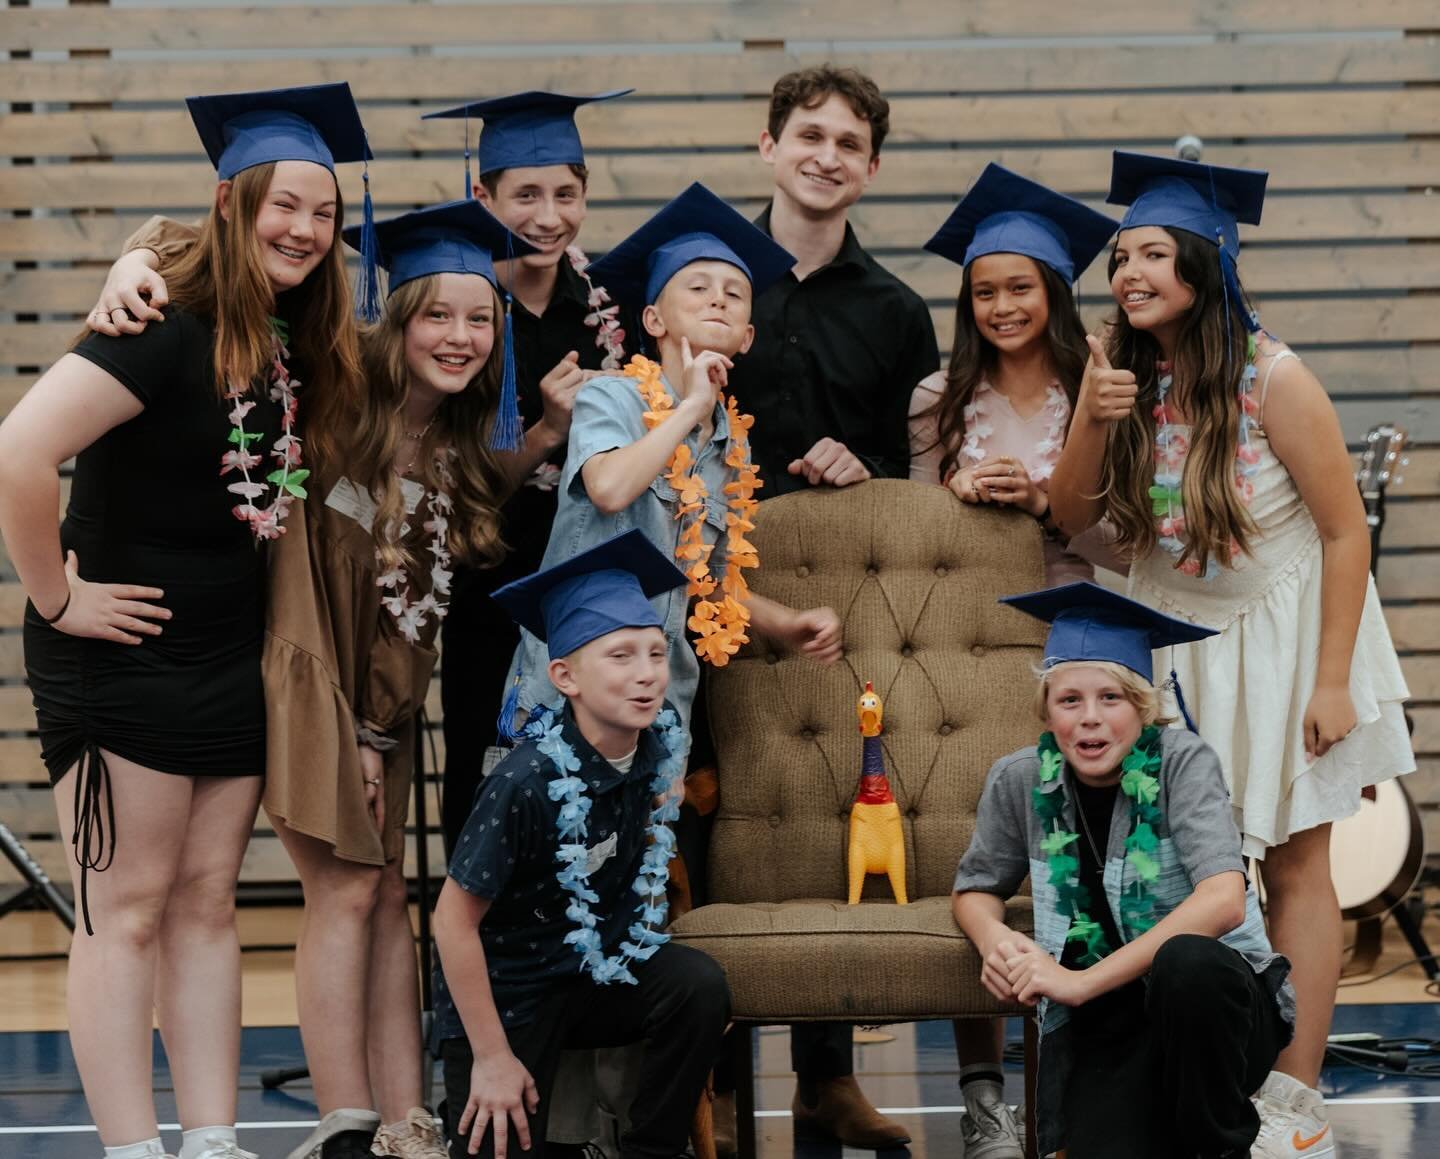 We had a BLAST at our 6th Grade Celebration!! 🎓🎉

We got to celebrate our 6th graders graduating from The Bridge and promoting a grade!! 🥳

🌟 Swipe through to see our how our ceremony and celebration went! ➡️